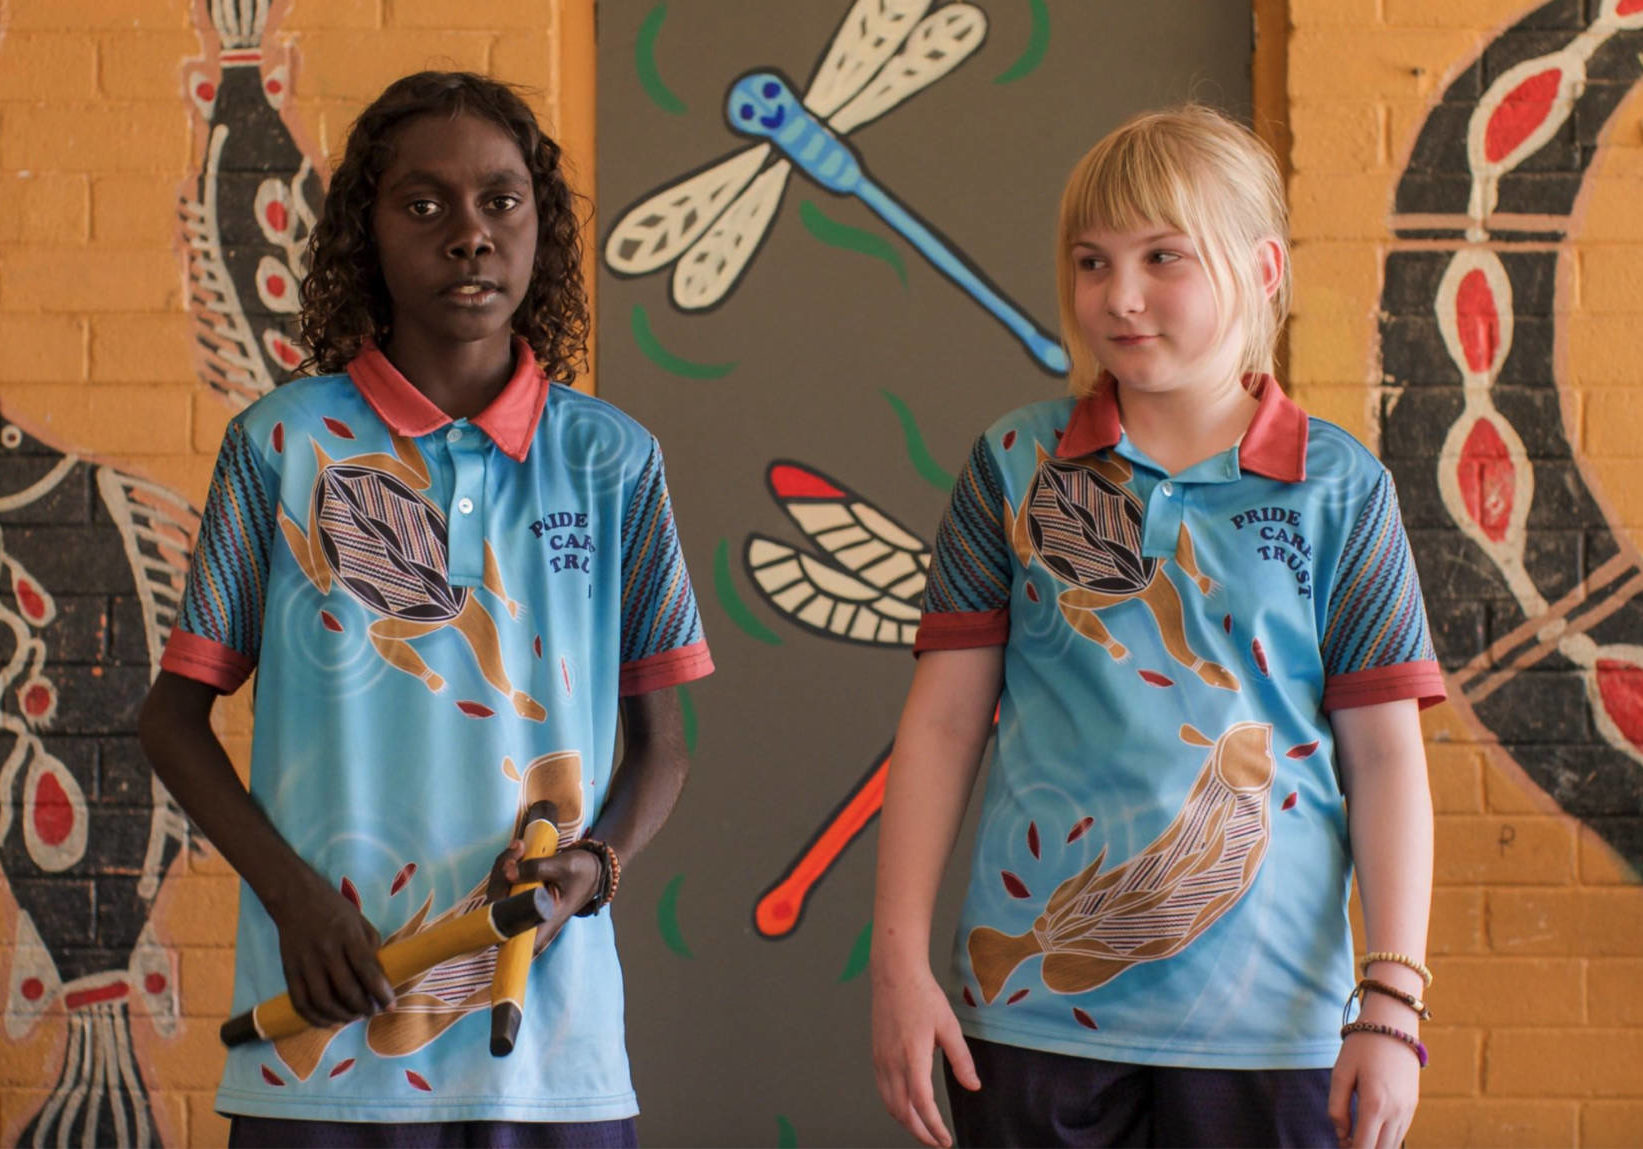 A photo of two children in school uniforms with colourful artwork behind them